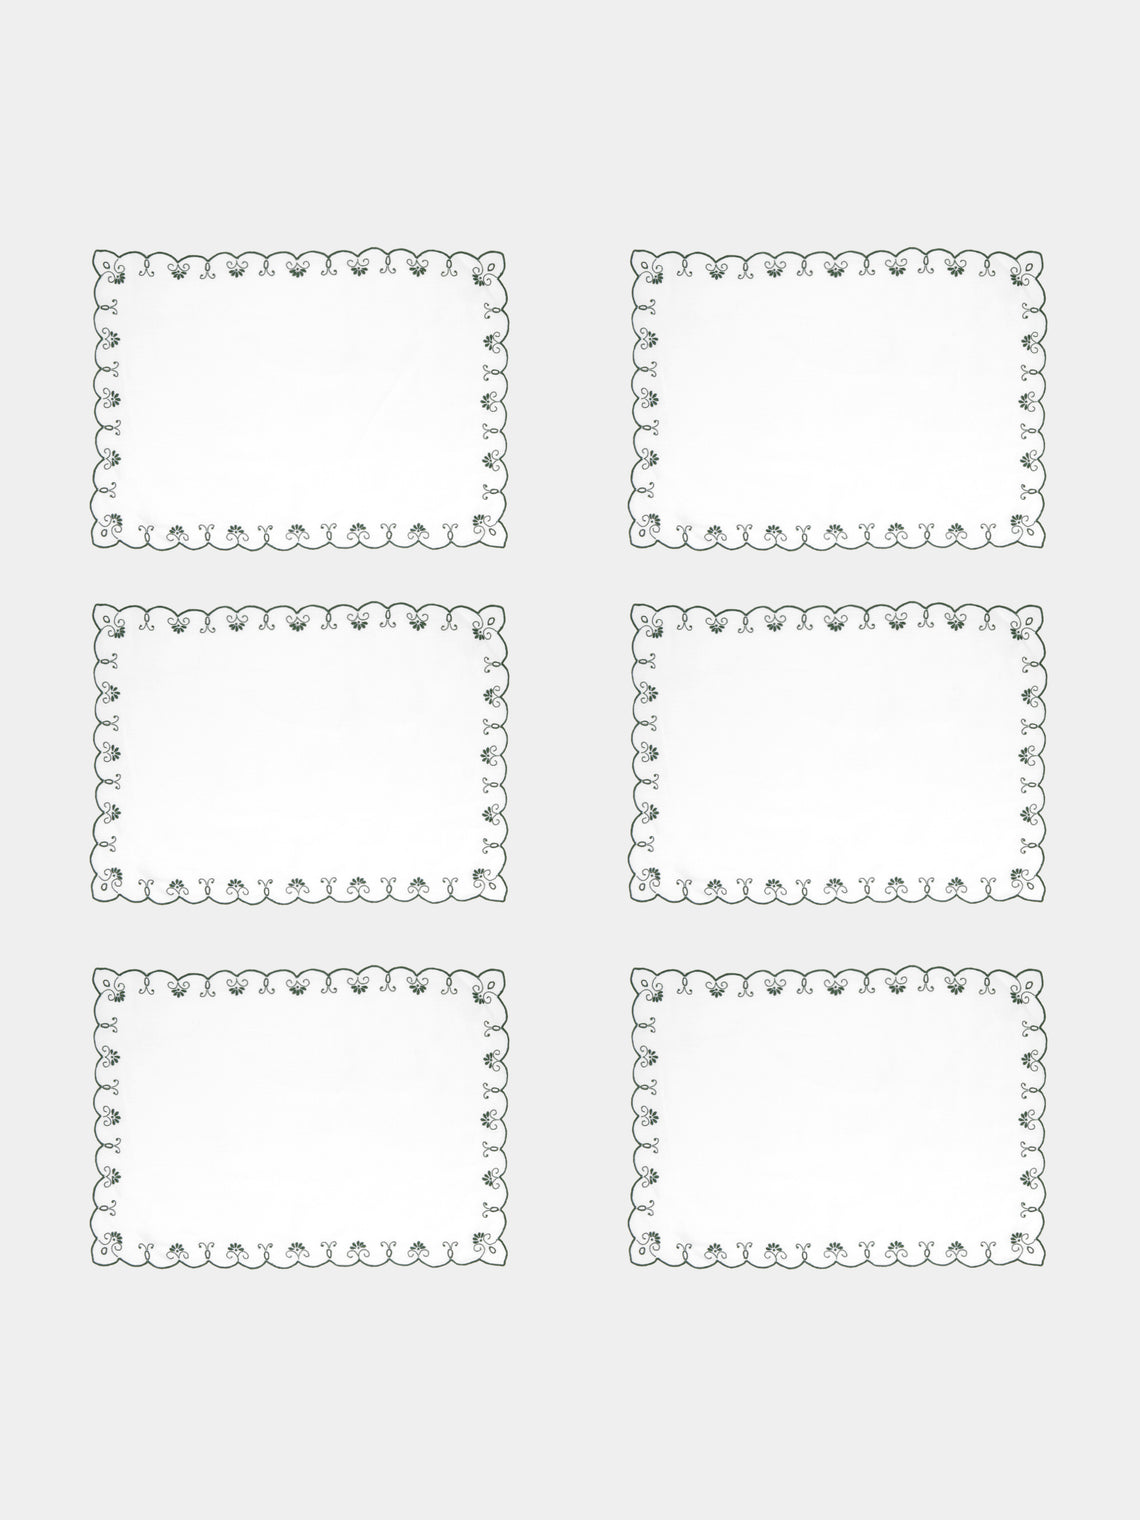 Taf Firenze - Piccoli Ventagli Hand-Embroidered Linen Placemats and Napkins (Set of 6) - Green - ABASK